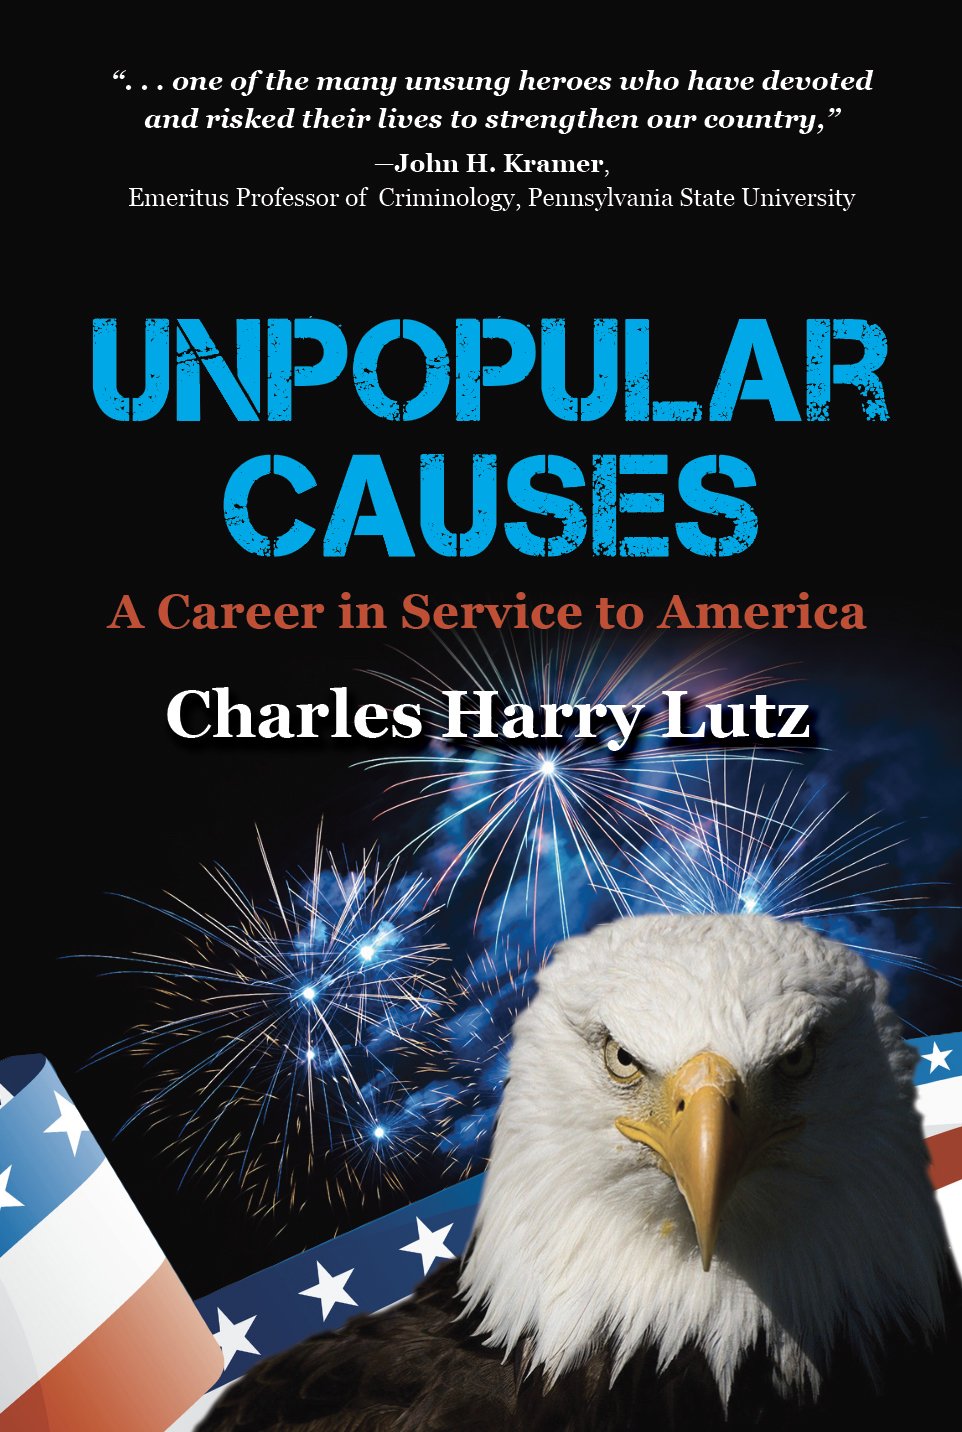 Unpopular Causes: A Career in Service to America by Charles Harry Lutz